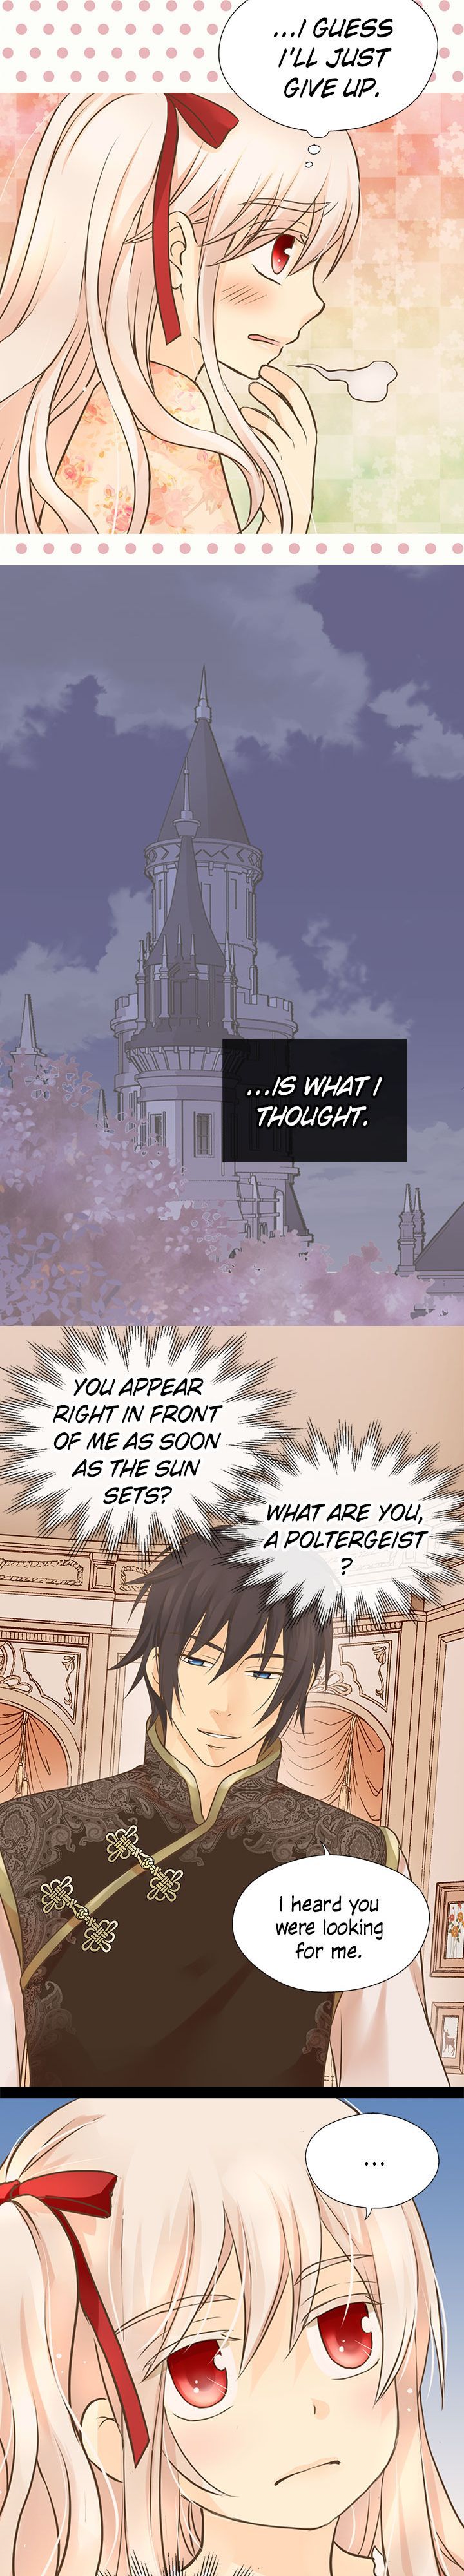 Daughter of the Emperor Chapter 129 page 13